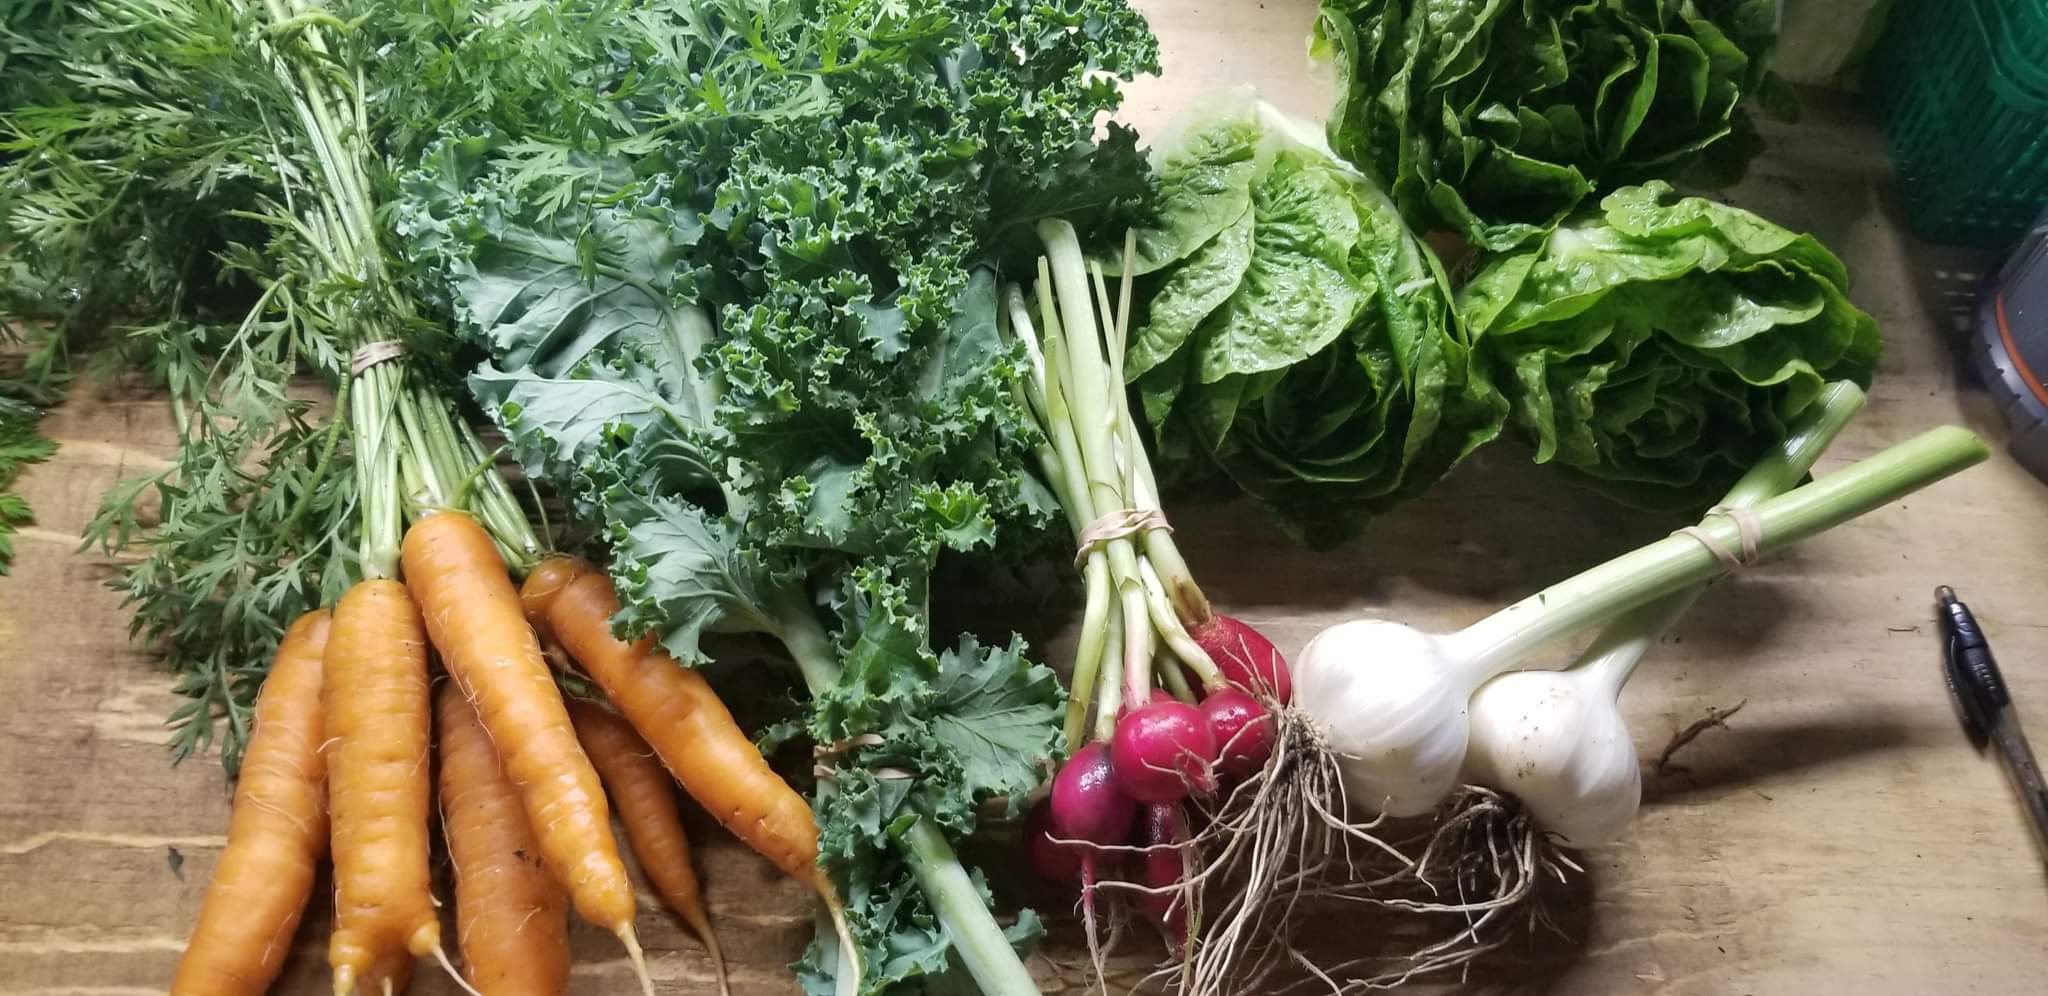 Carrots, kale, radishes, lettuce, and garlic from Winterhill Farm and Garden